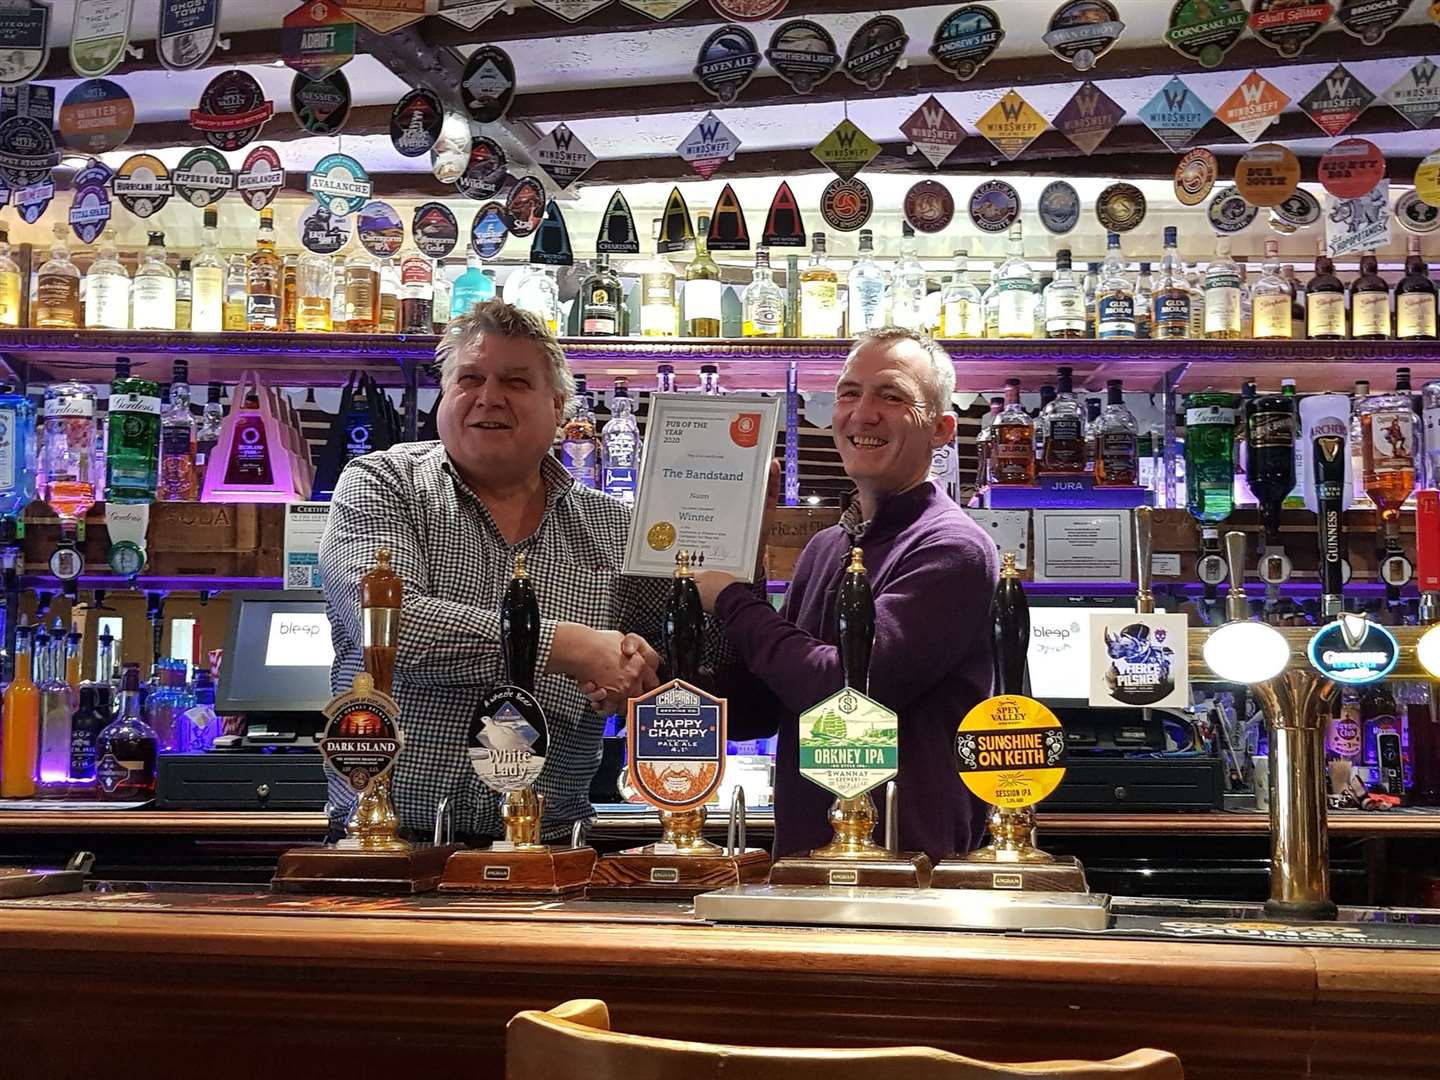 CAMRA Highlands and Western Isles branch chairman Simon Urry presents the award to Paul Geddes from the Bandstand Bar and Restaurant in Nairn.